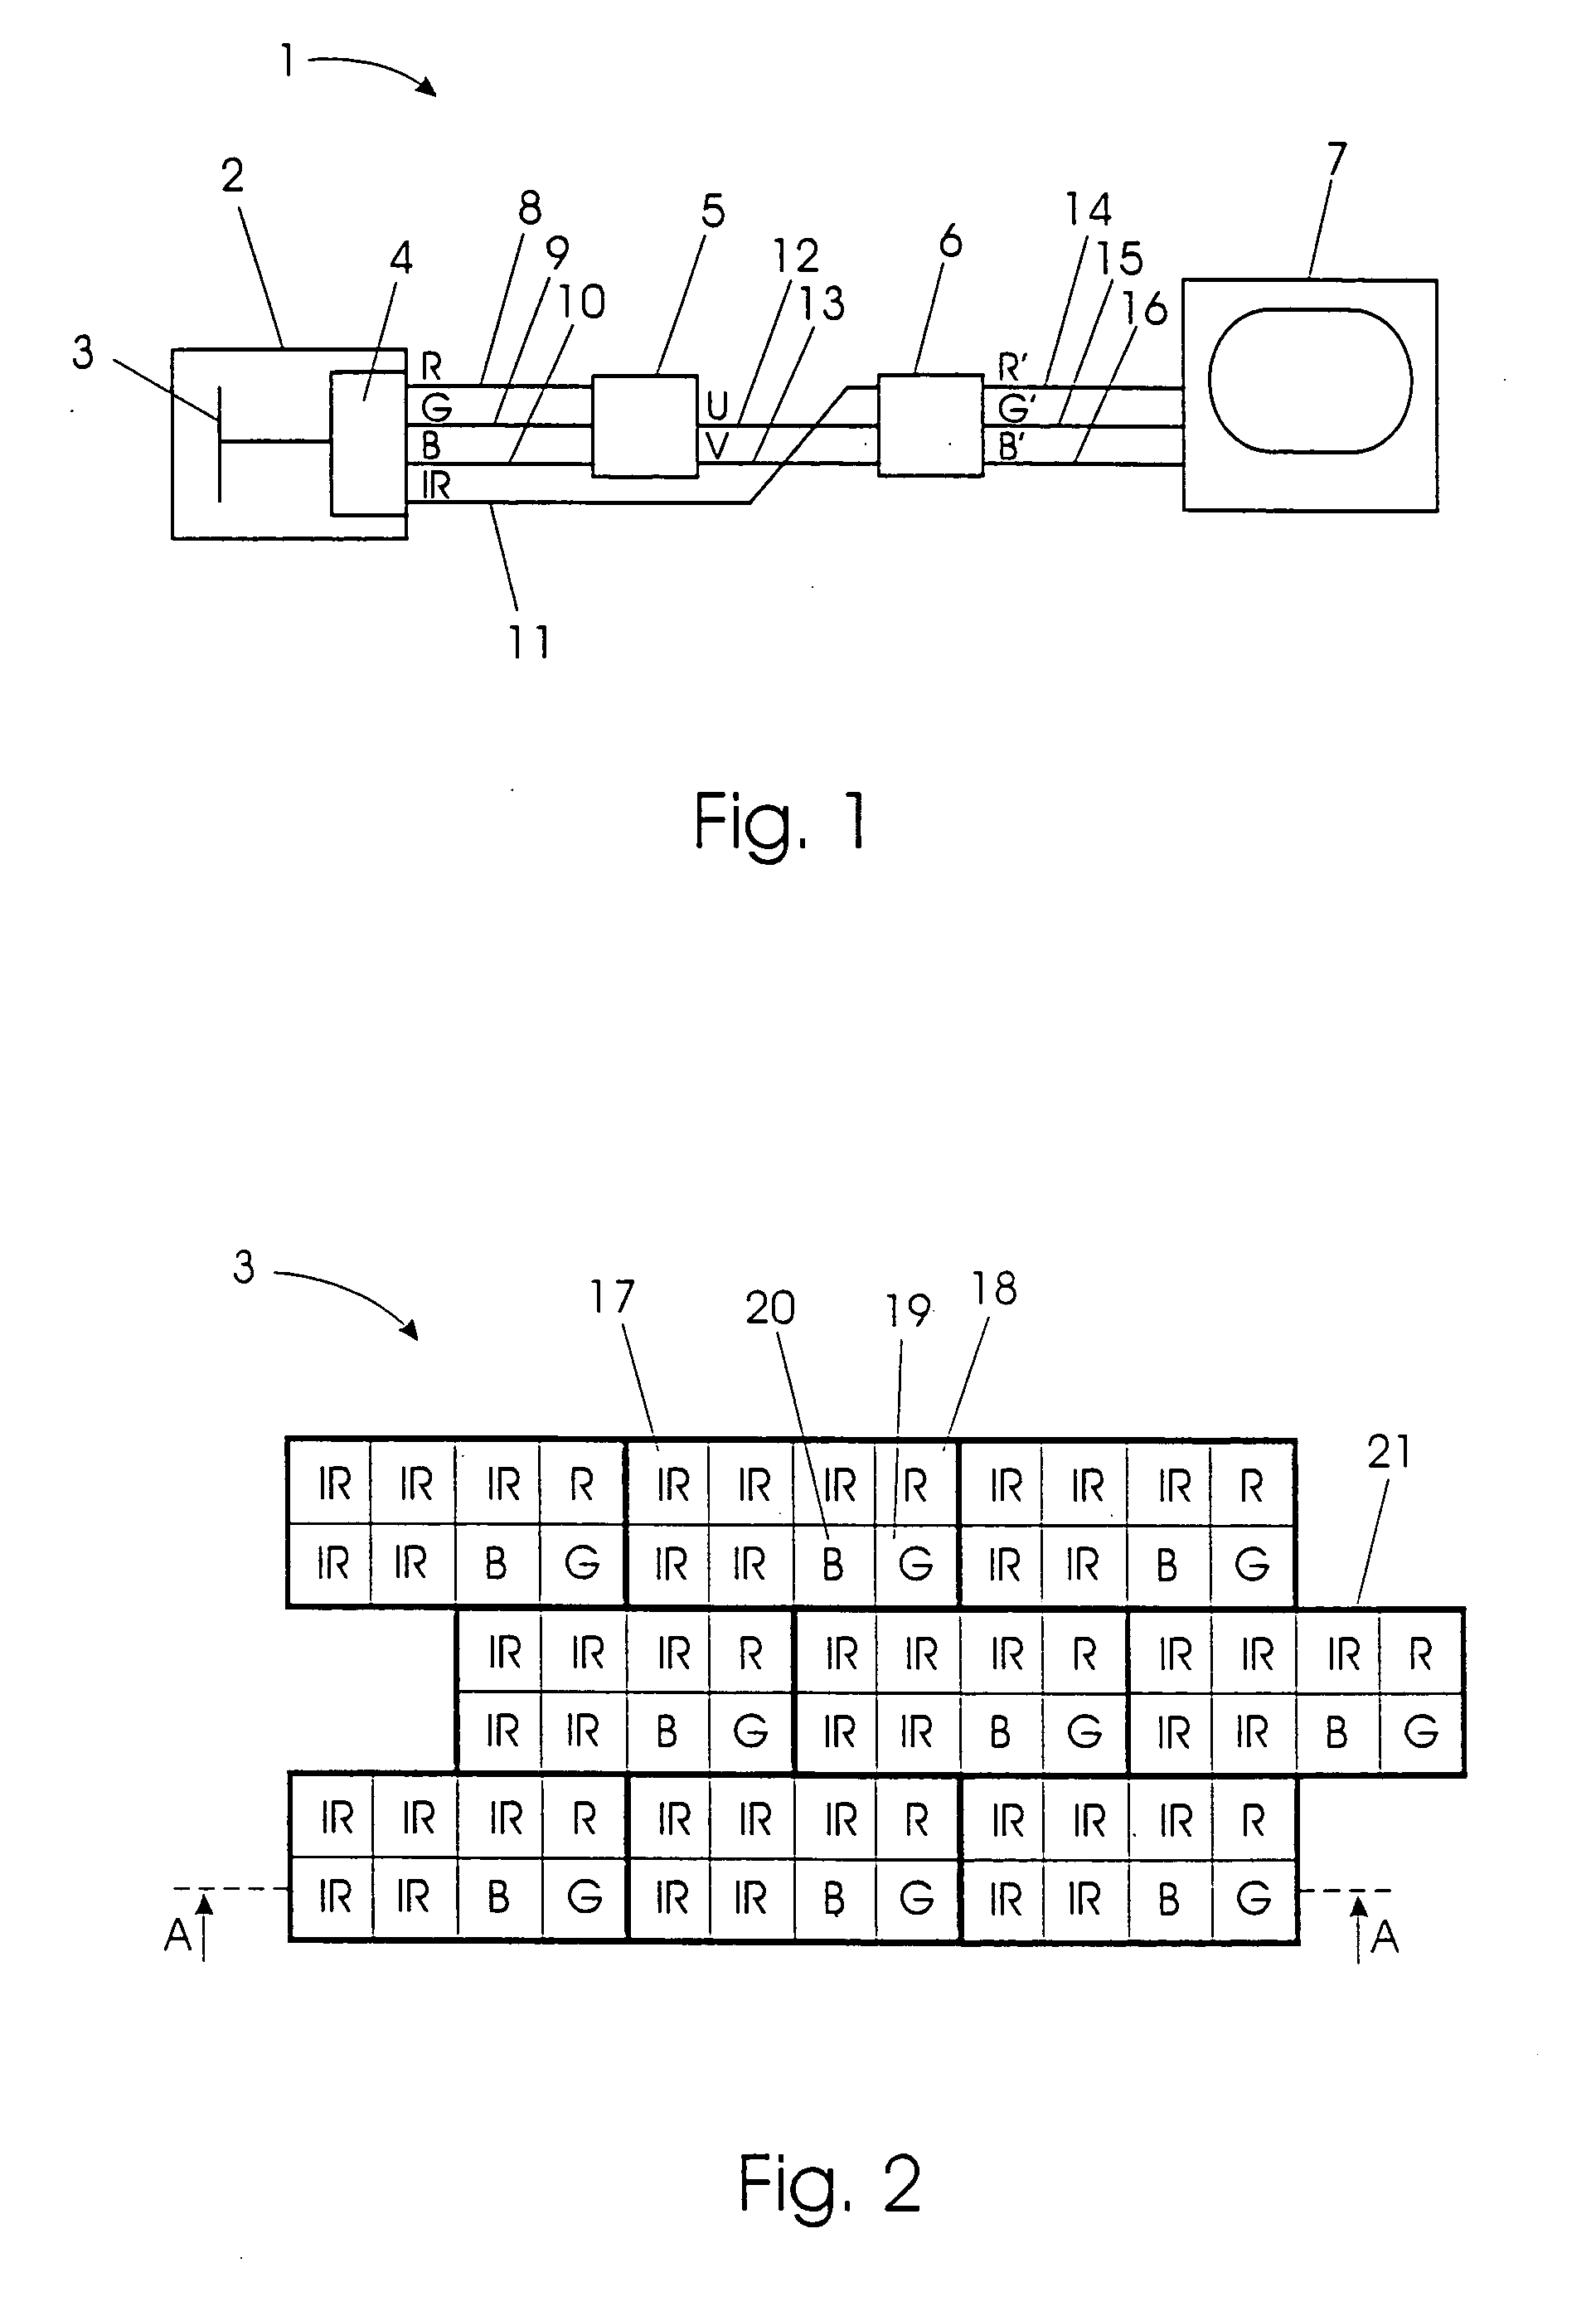 Sensor array with a number of types of optical sensors